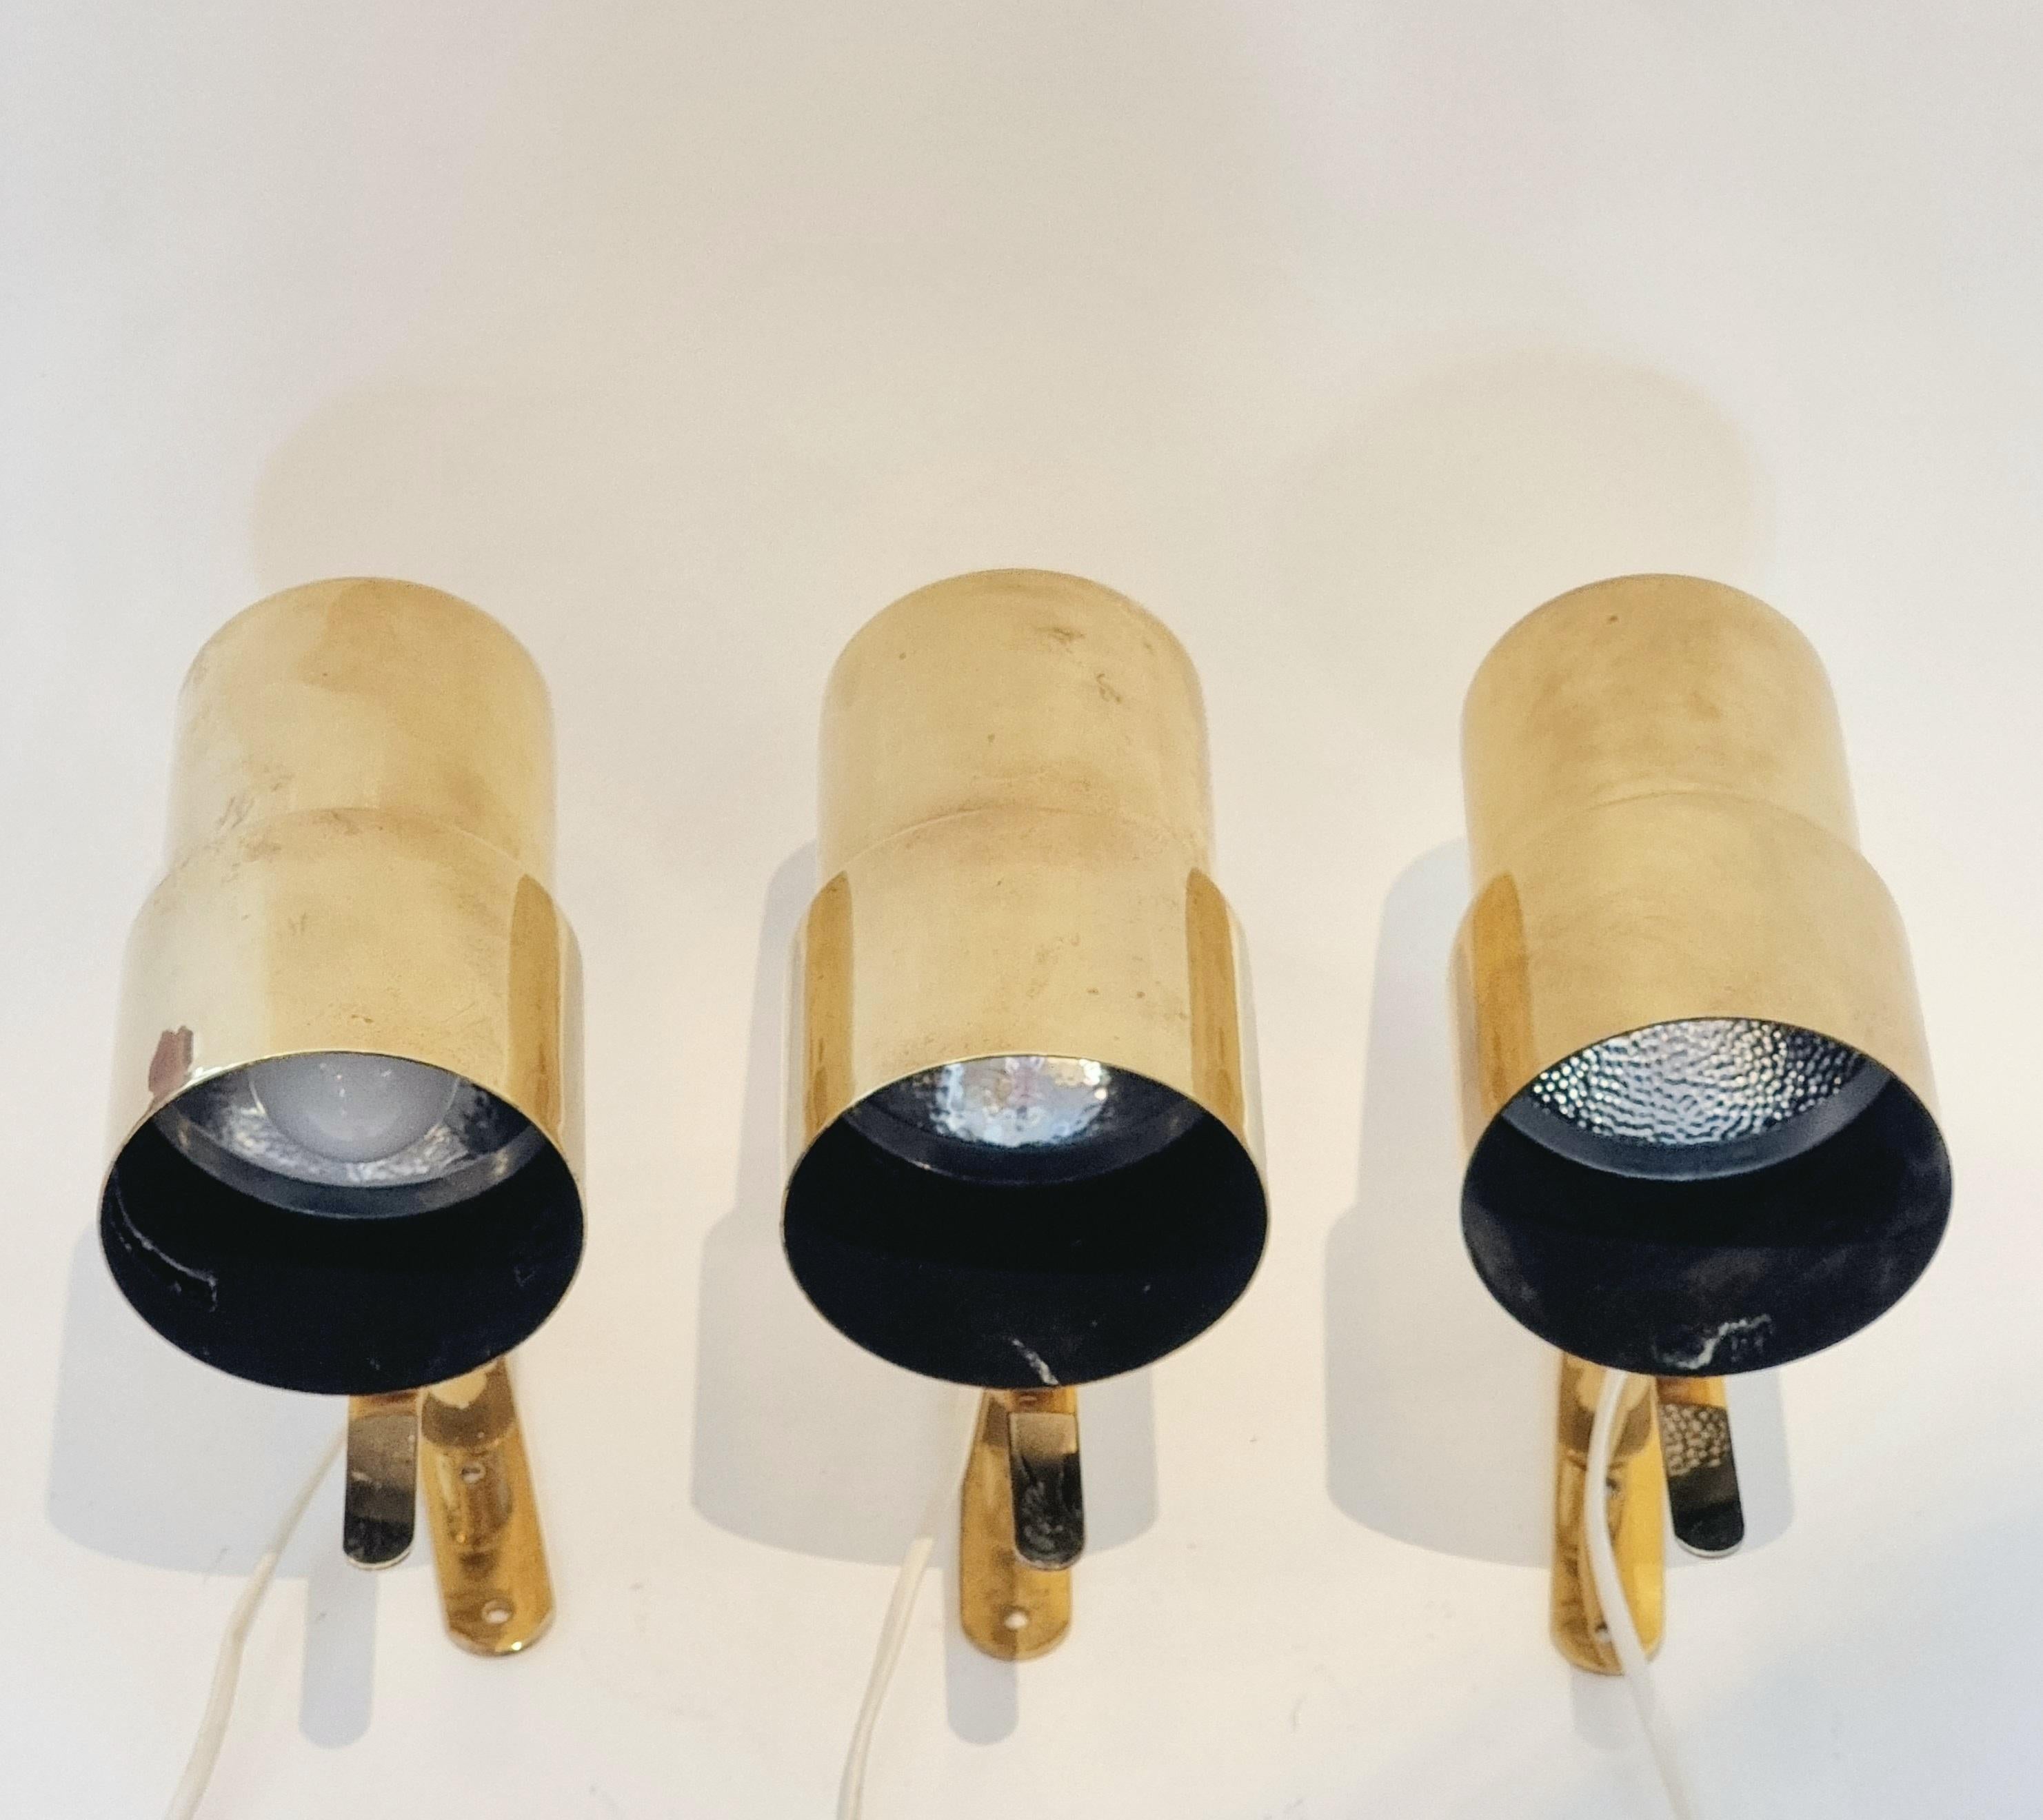 Classic midcentury wall lamps in polished brass, model V-324 designed by Hans-Agne Jakobsson for Markaryd AB, Sweden. Produced in the 1960s. 3 pcs available, sold per pcs.


Good vintage condition consistent with age and use.

Please feel free